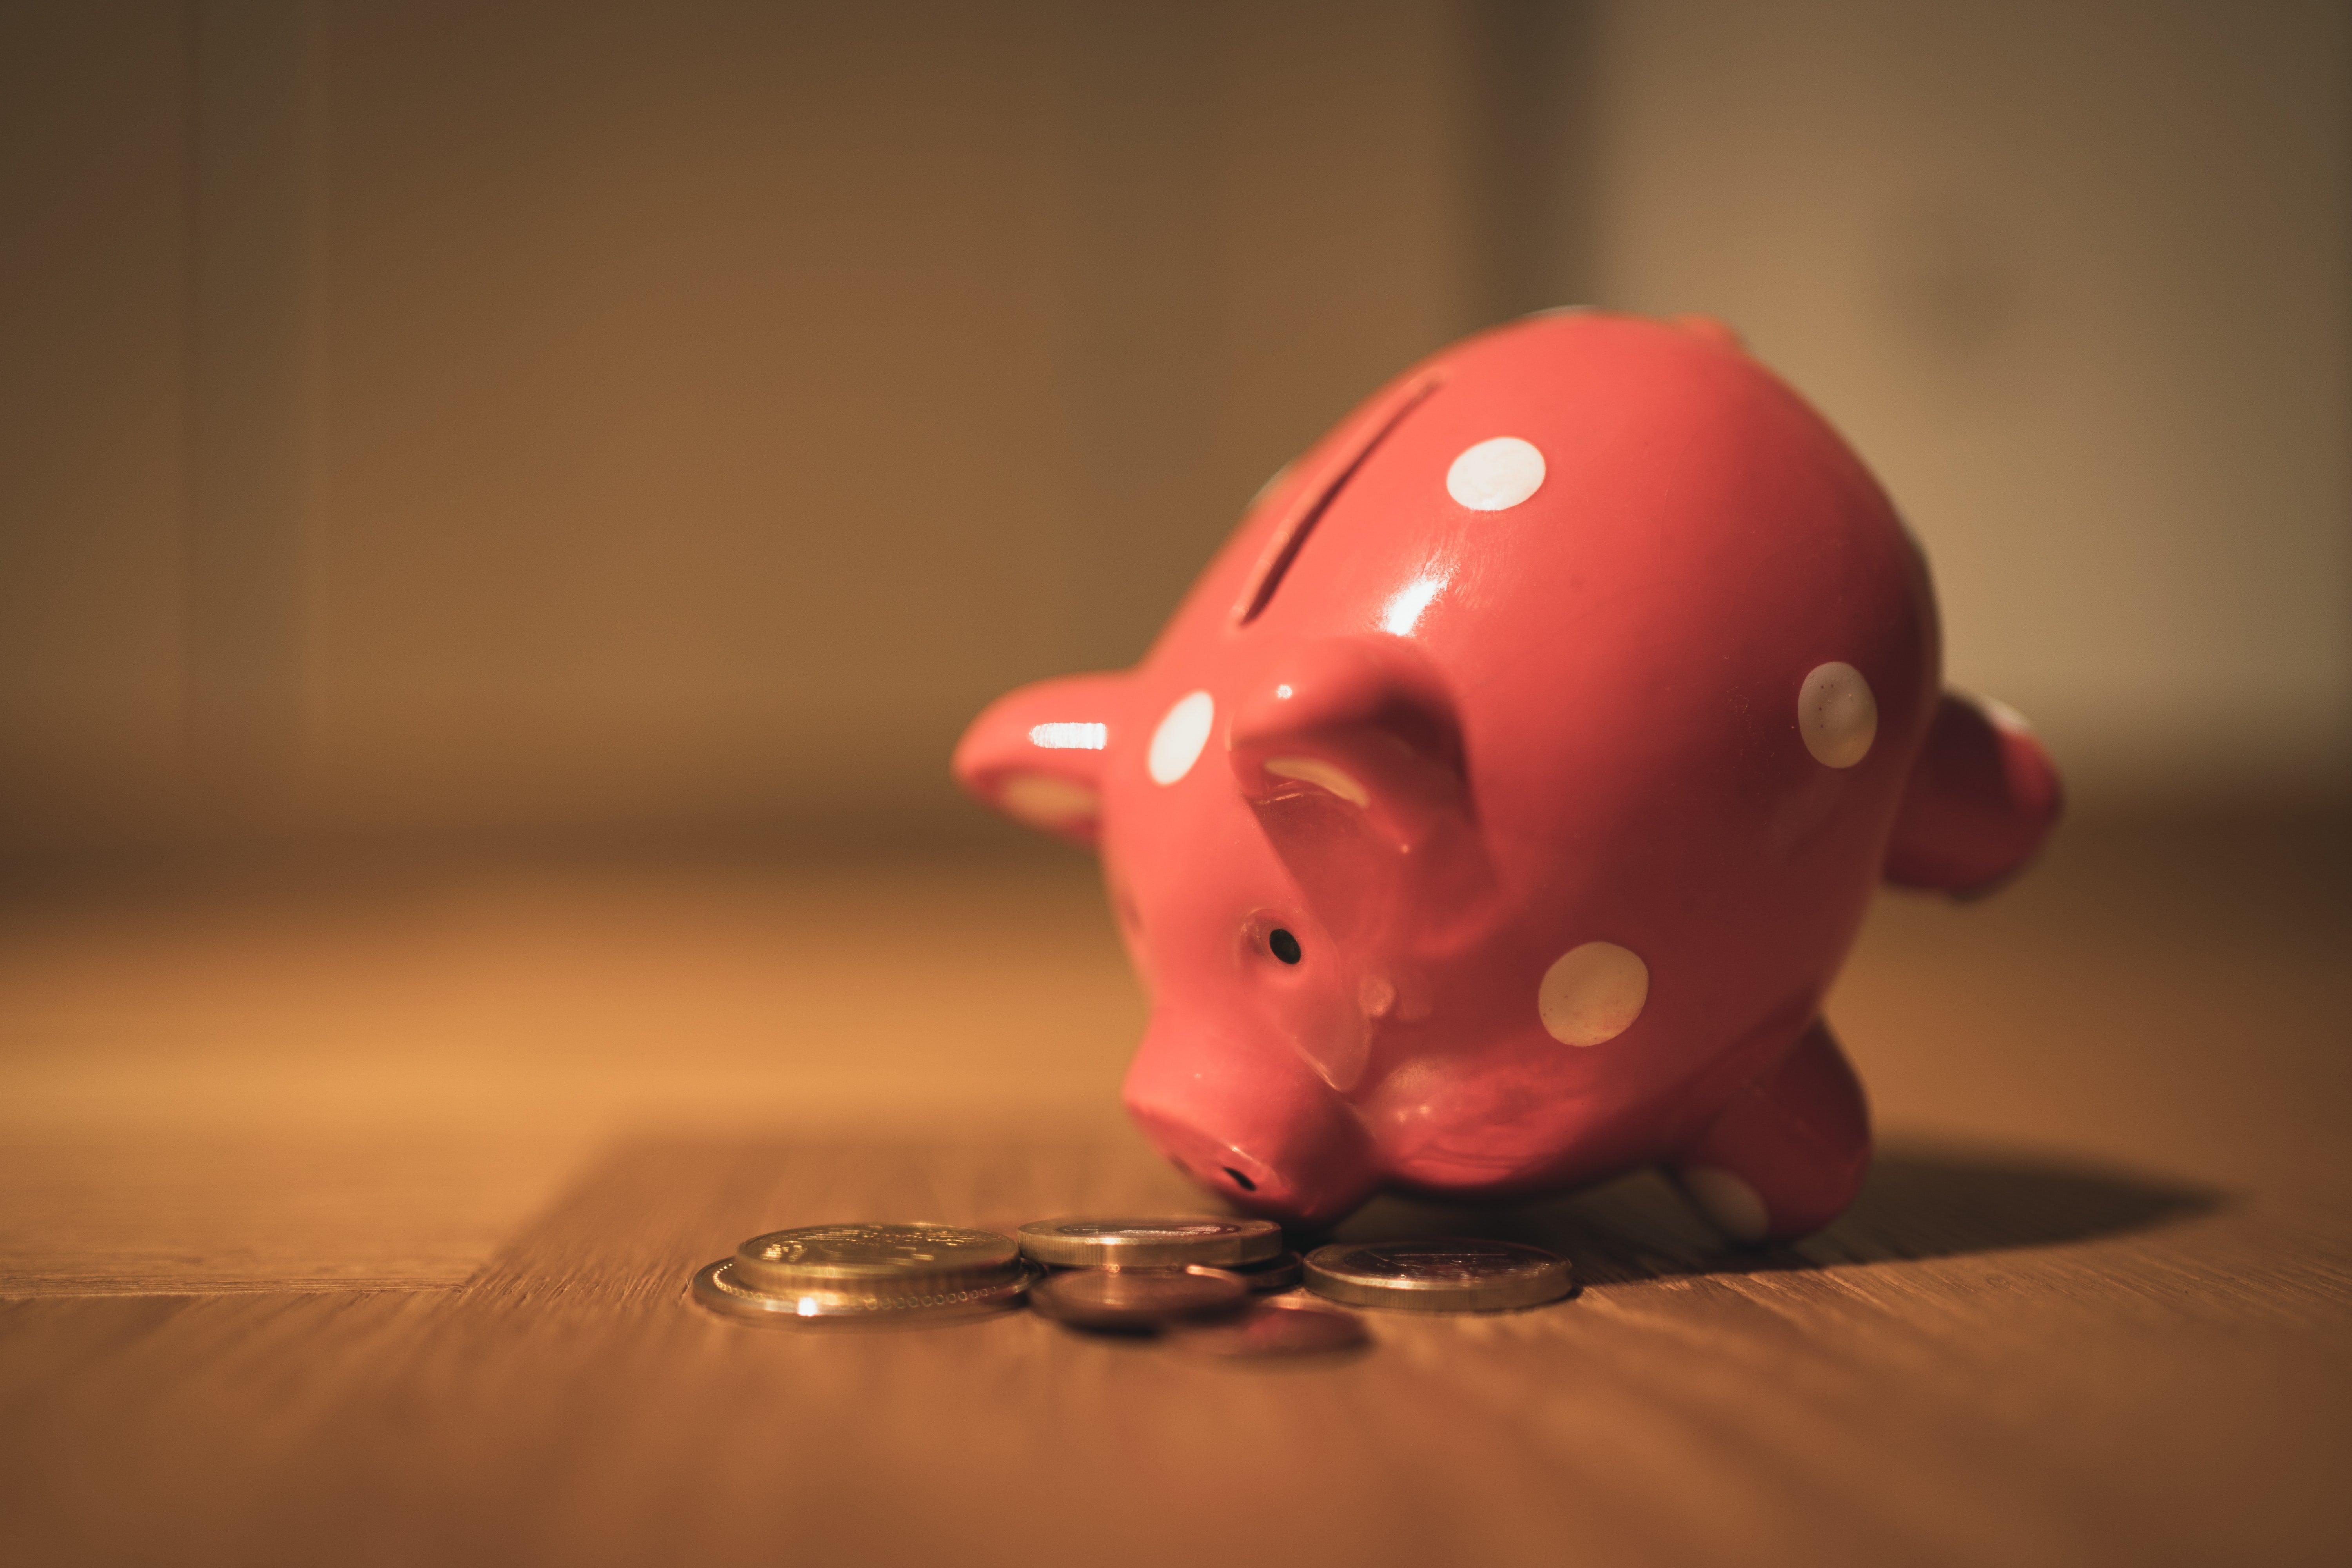 Eddie was gone and he'd taken the money from his piggy bank. | Source: Unsplash